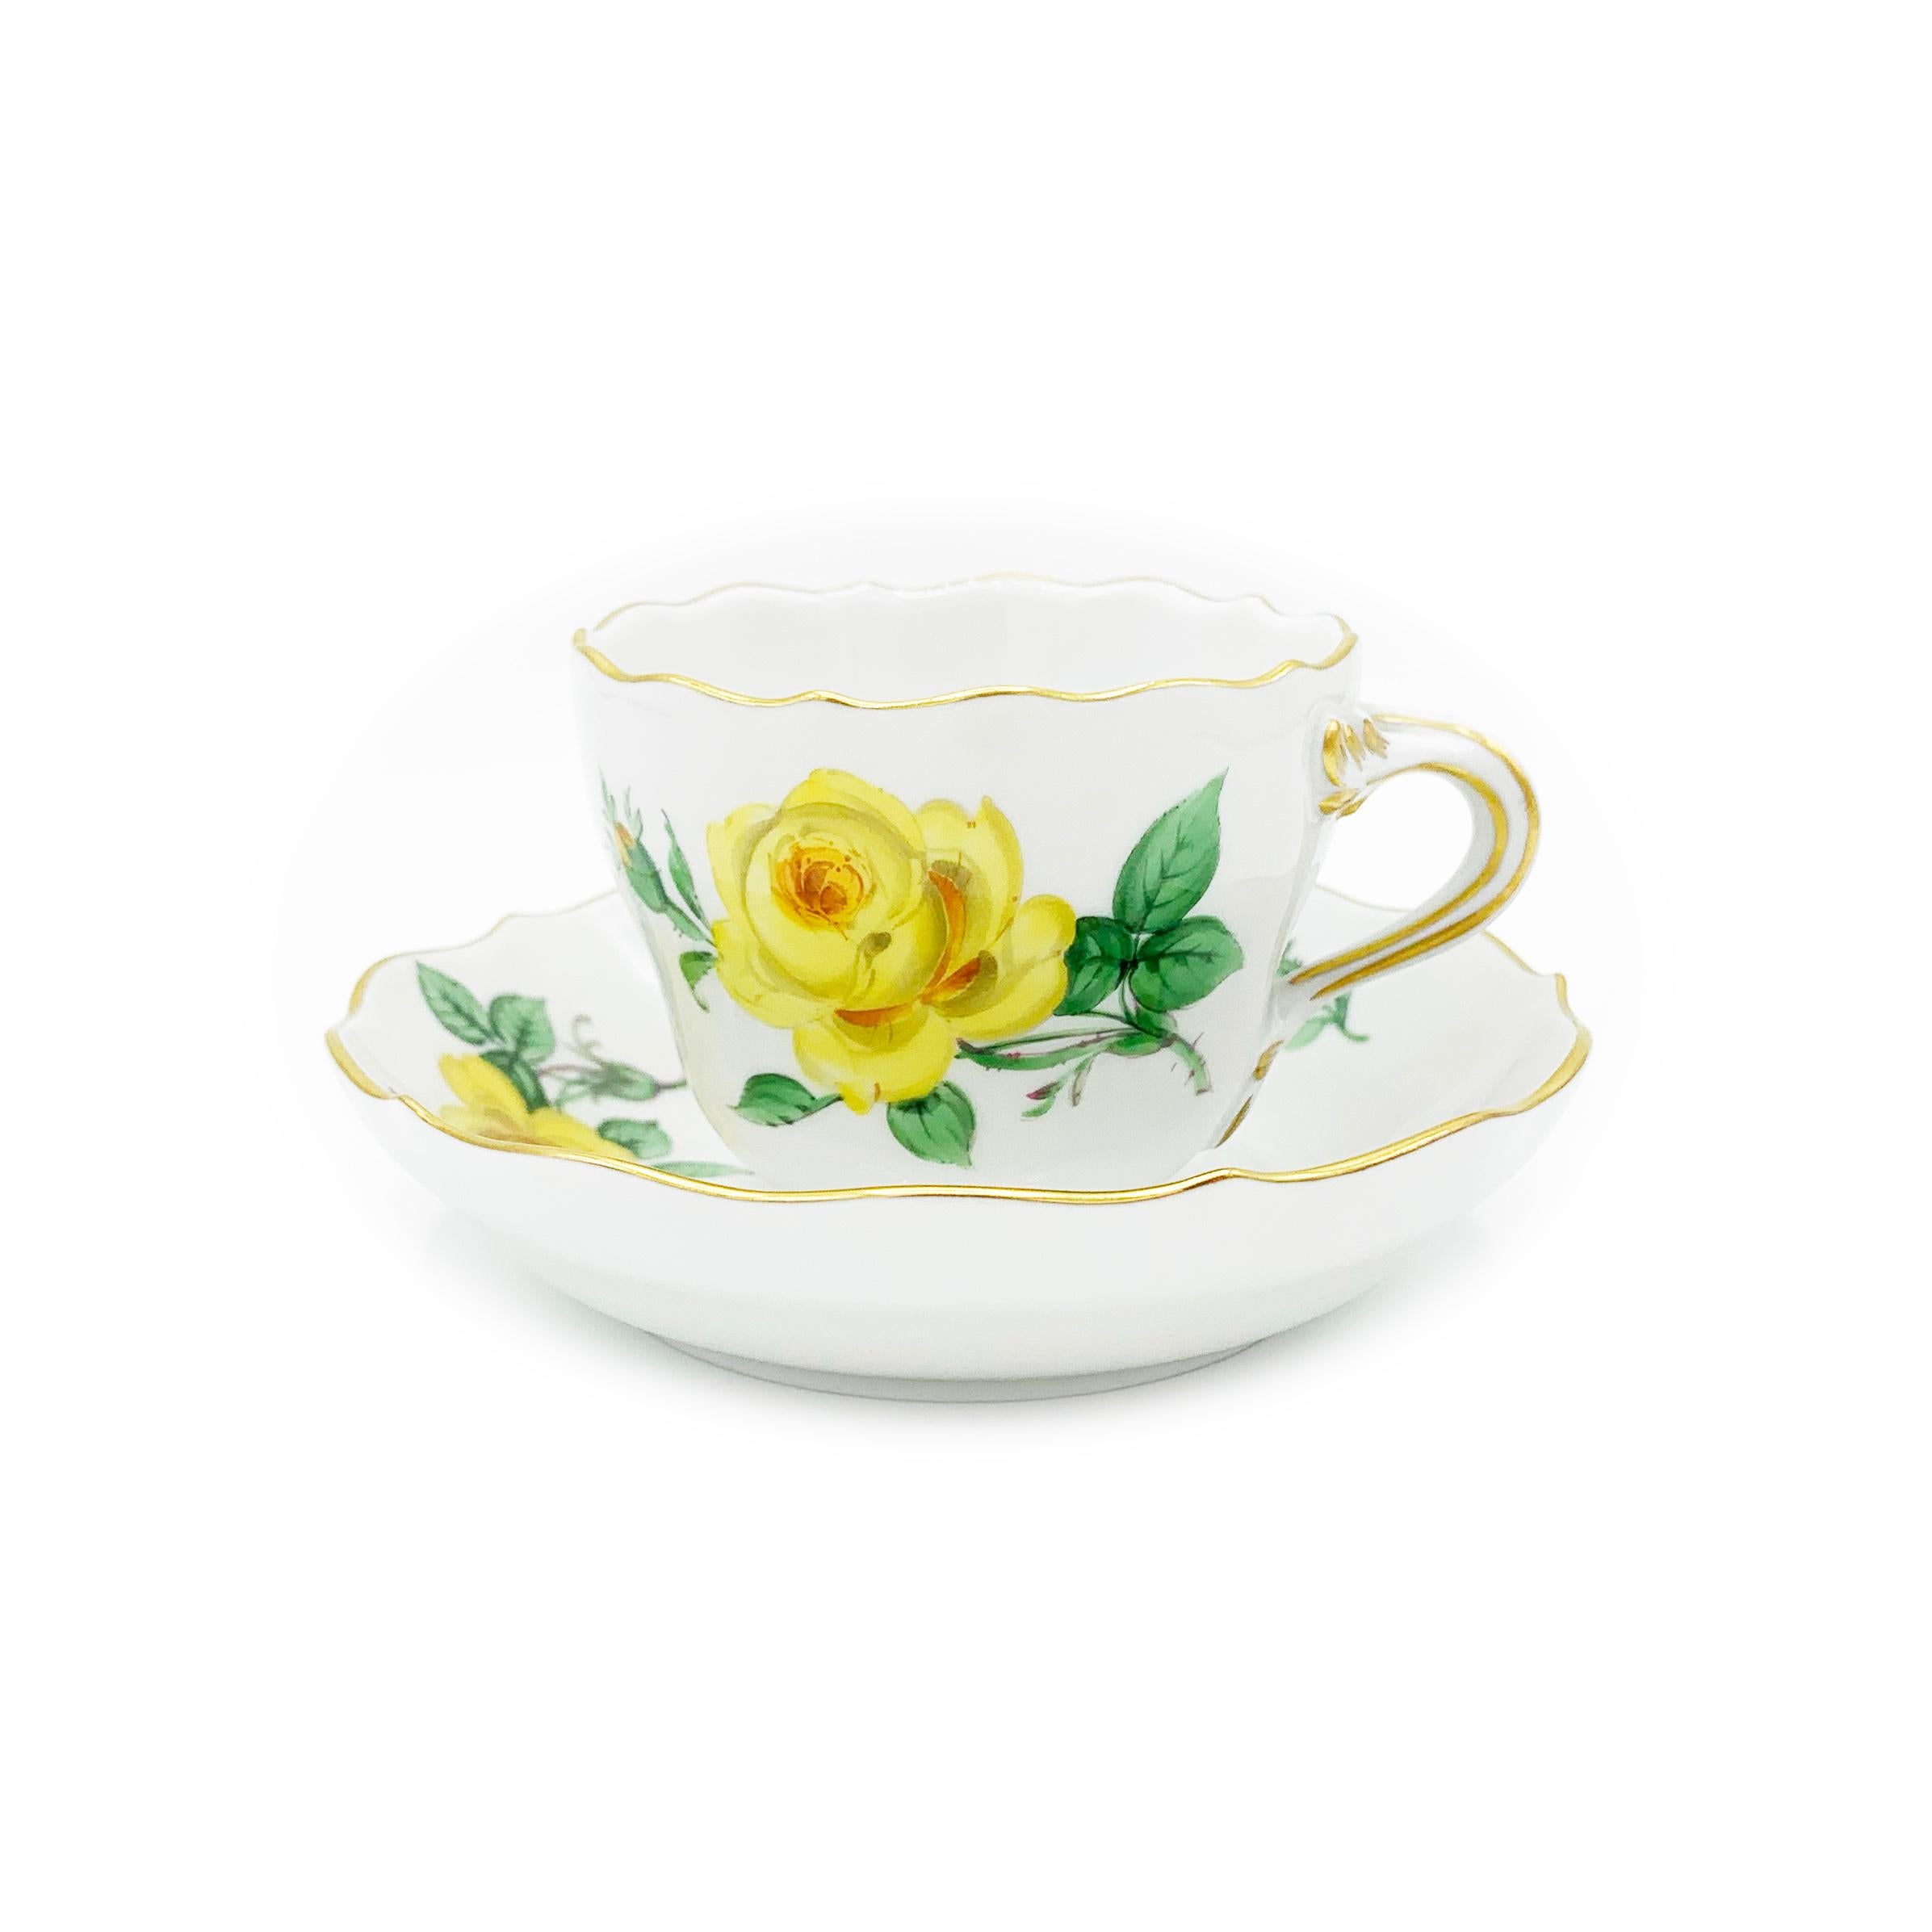 Mid-20th century Meissen gold color yellow rose coffee cup saucer.

2-part mocha setting from Meissen.
Decor: Gelbe Rose.
Saucer diameter approx. 11 cm and height approx.2.5cm.
Cup diameter approx. 6.5 cm and height approx. 5 cm.

2 tlg.